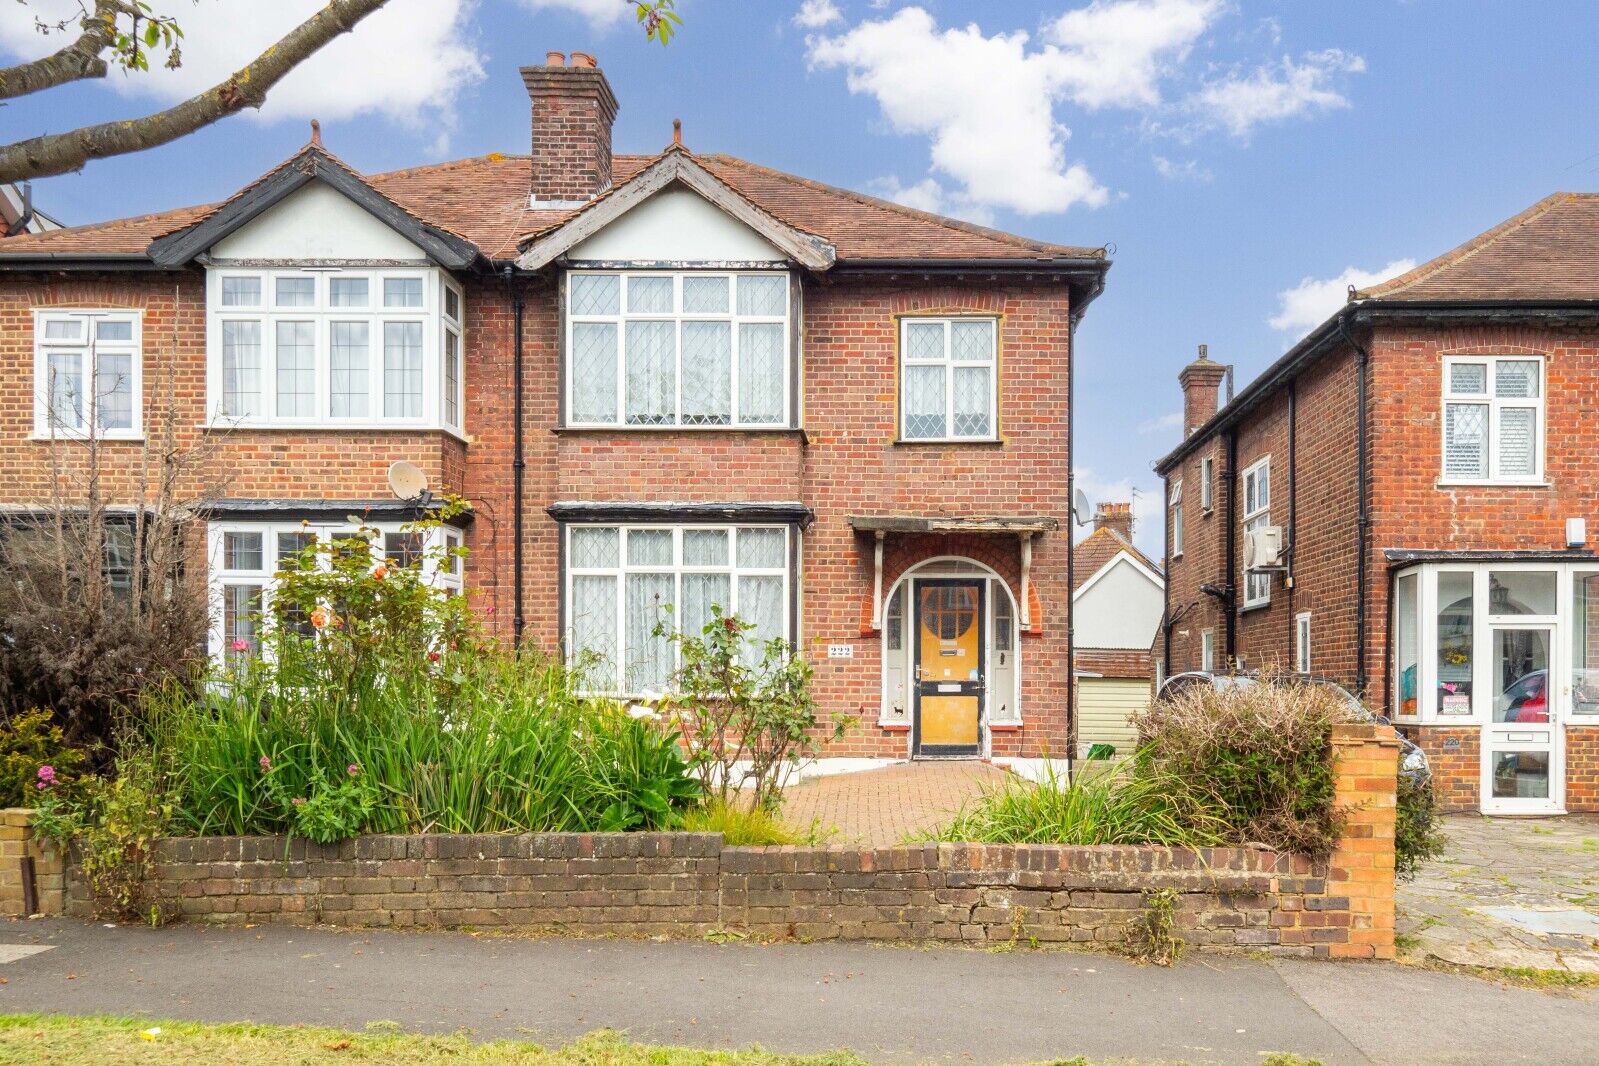 3 bedroom semi detached house for sale Church Hill Road, Cheam, SM3, main image